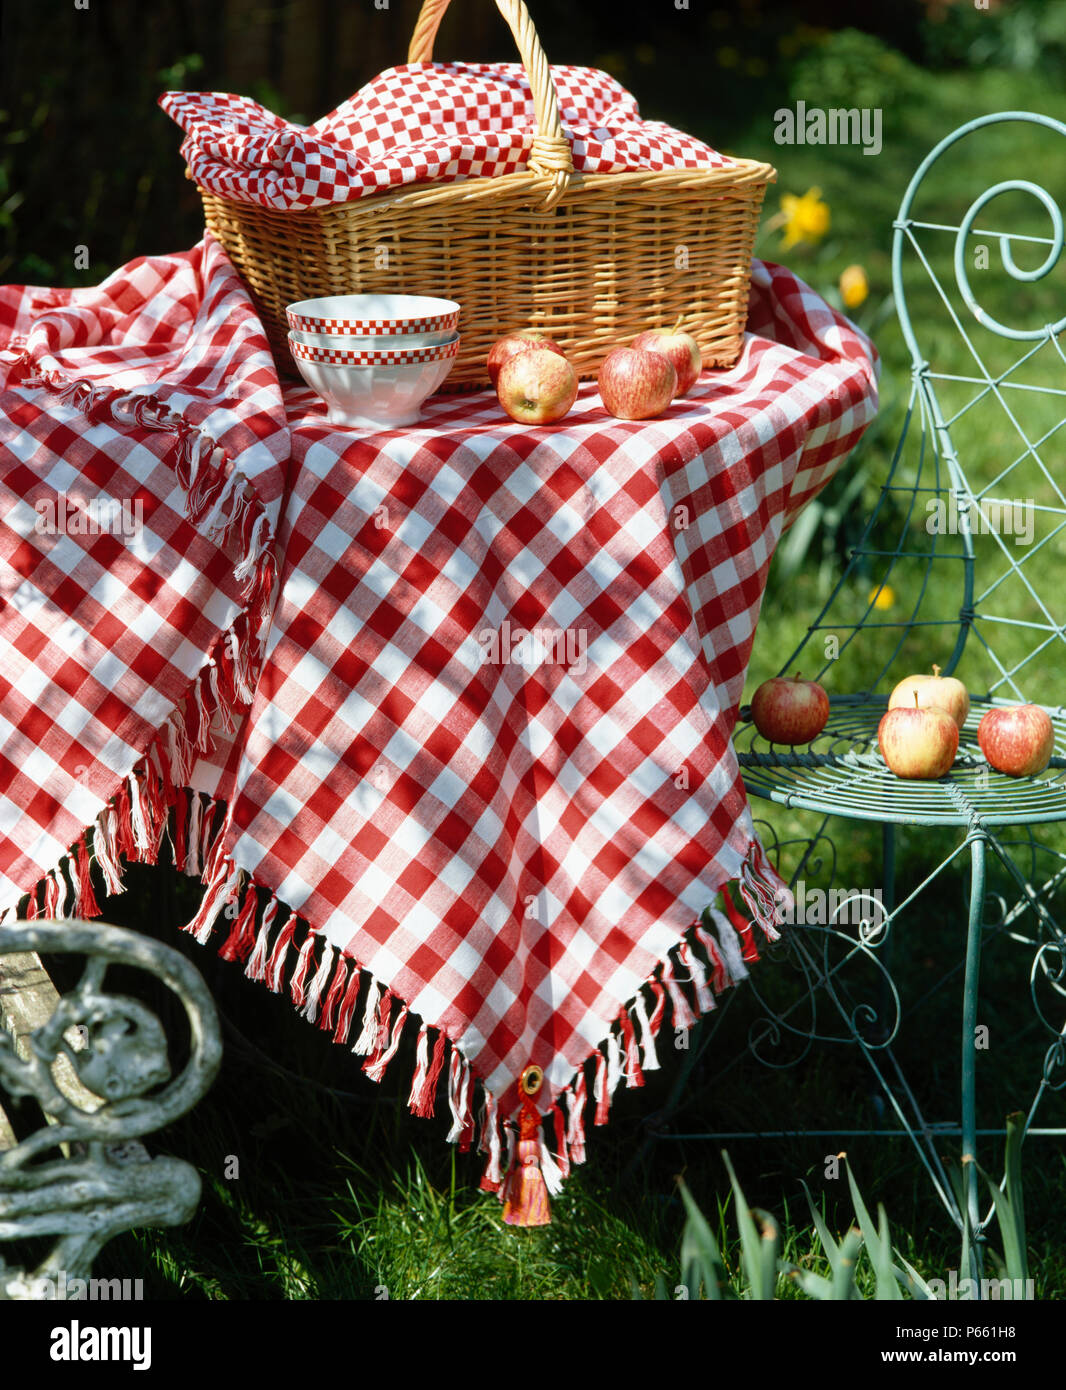 Close-up of willow basket on garden table with hand-made red checked cloth Stock Photo